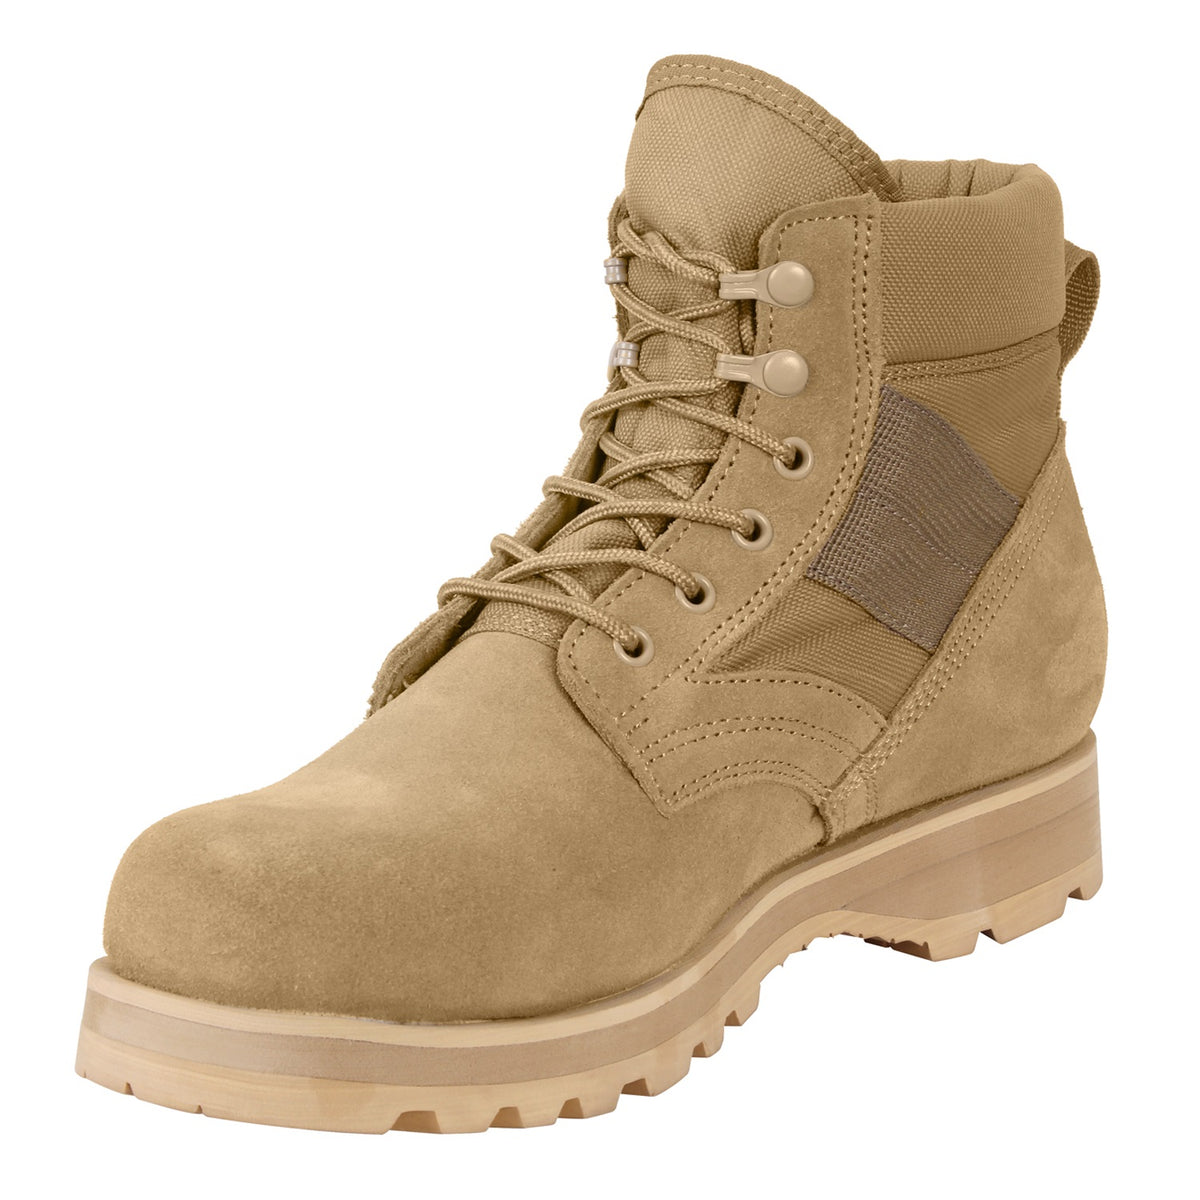 Rothco Military Combat Work Boots - CLEARANCE!